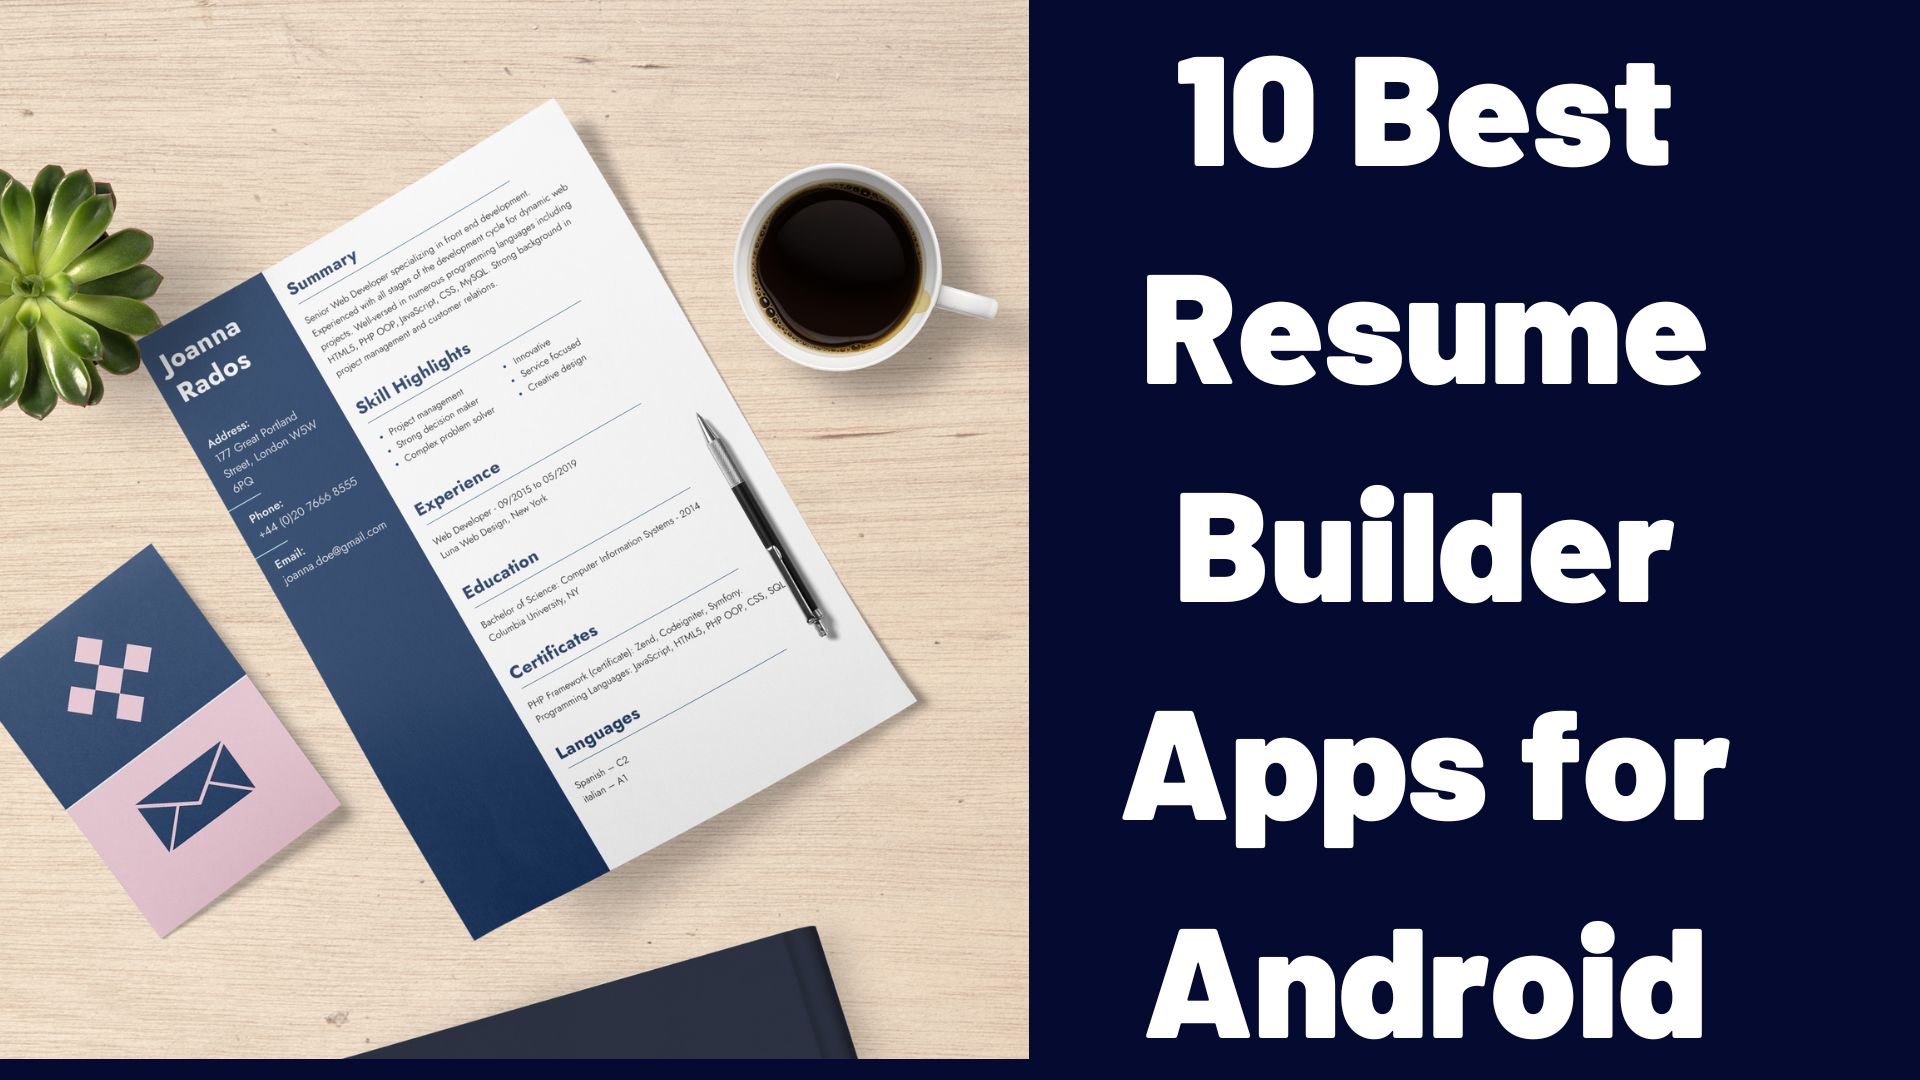 10 Best Resume Builder Apps for Android